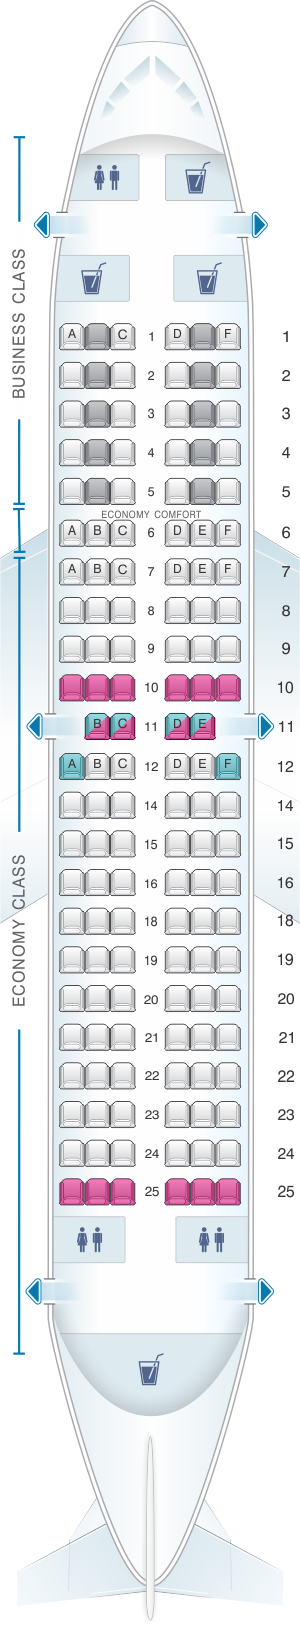 Klm Airlines Seating Chart